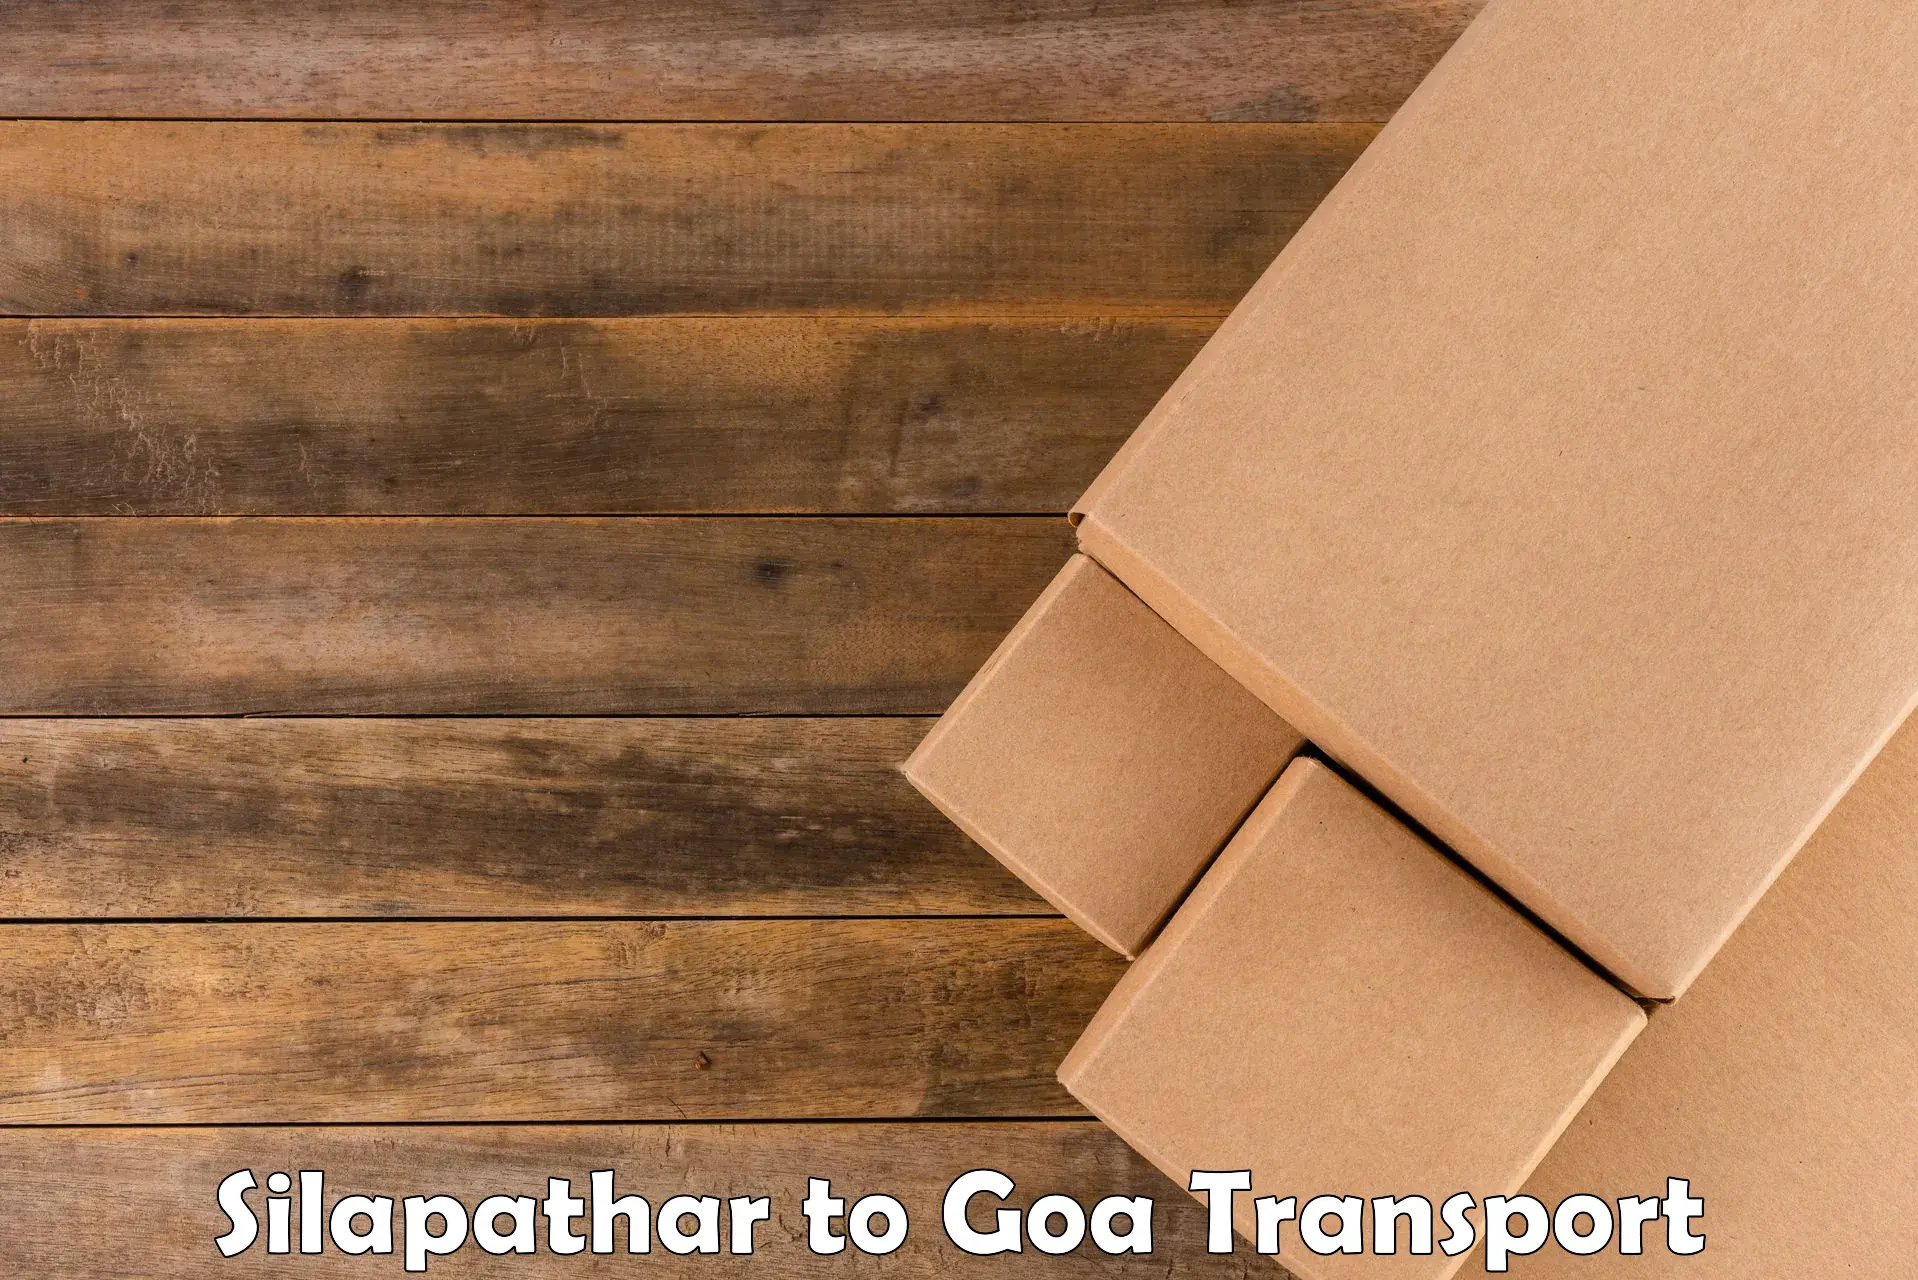 Bike transport service Silapathar to Margao